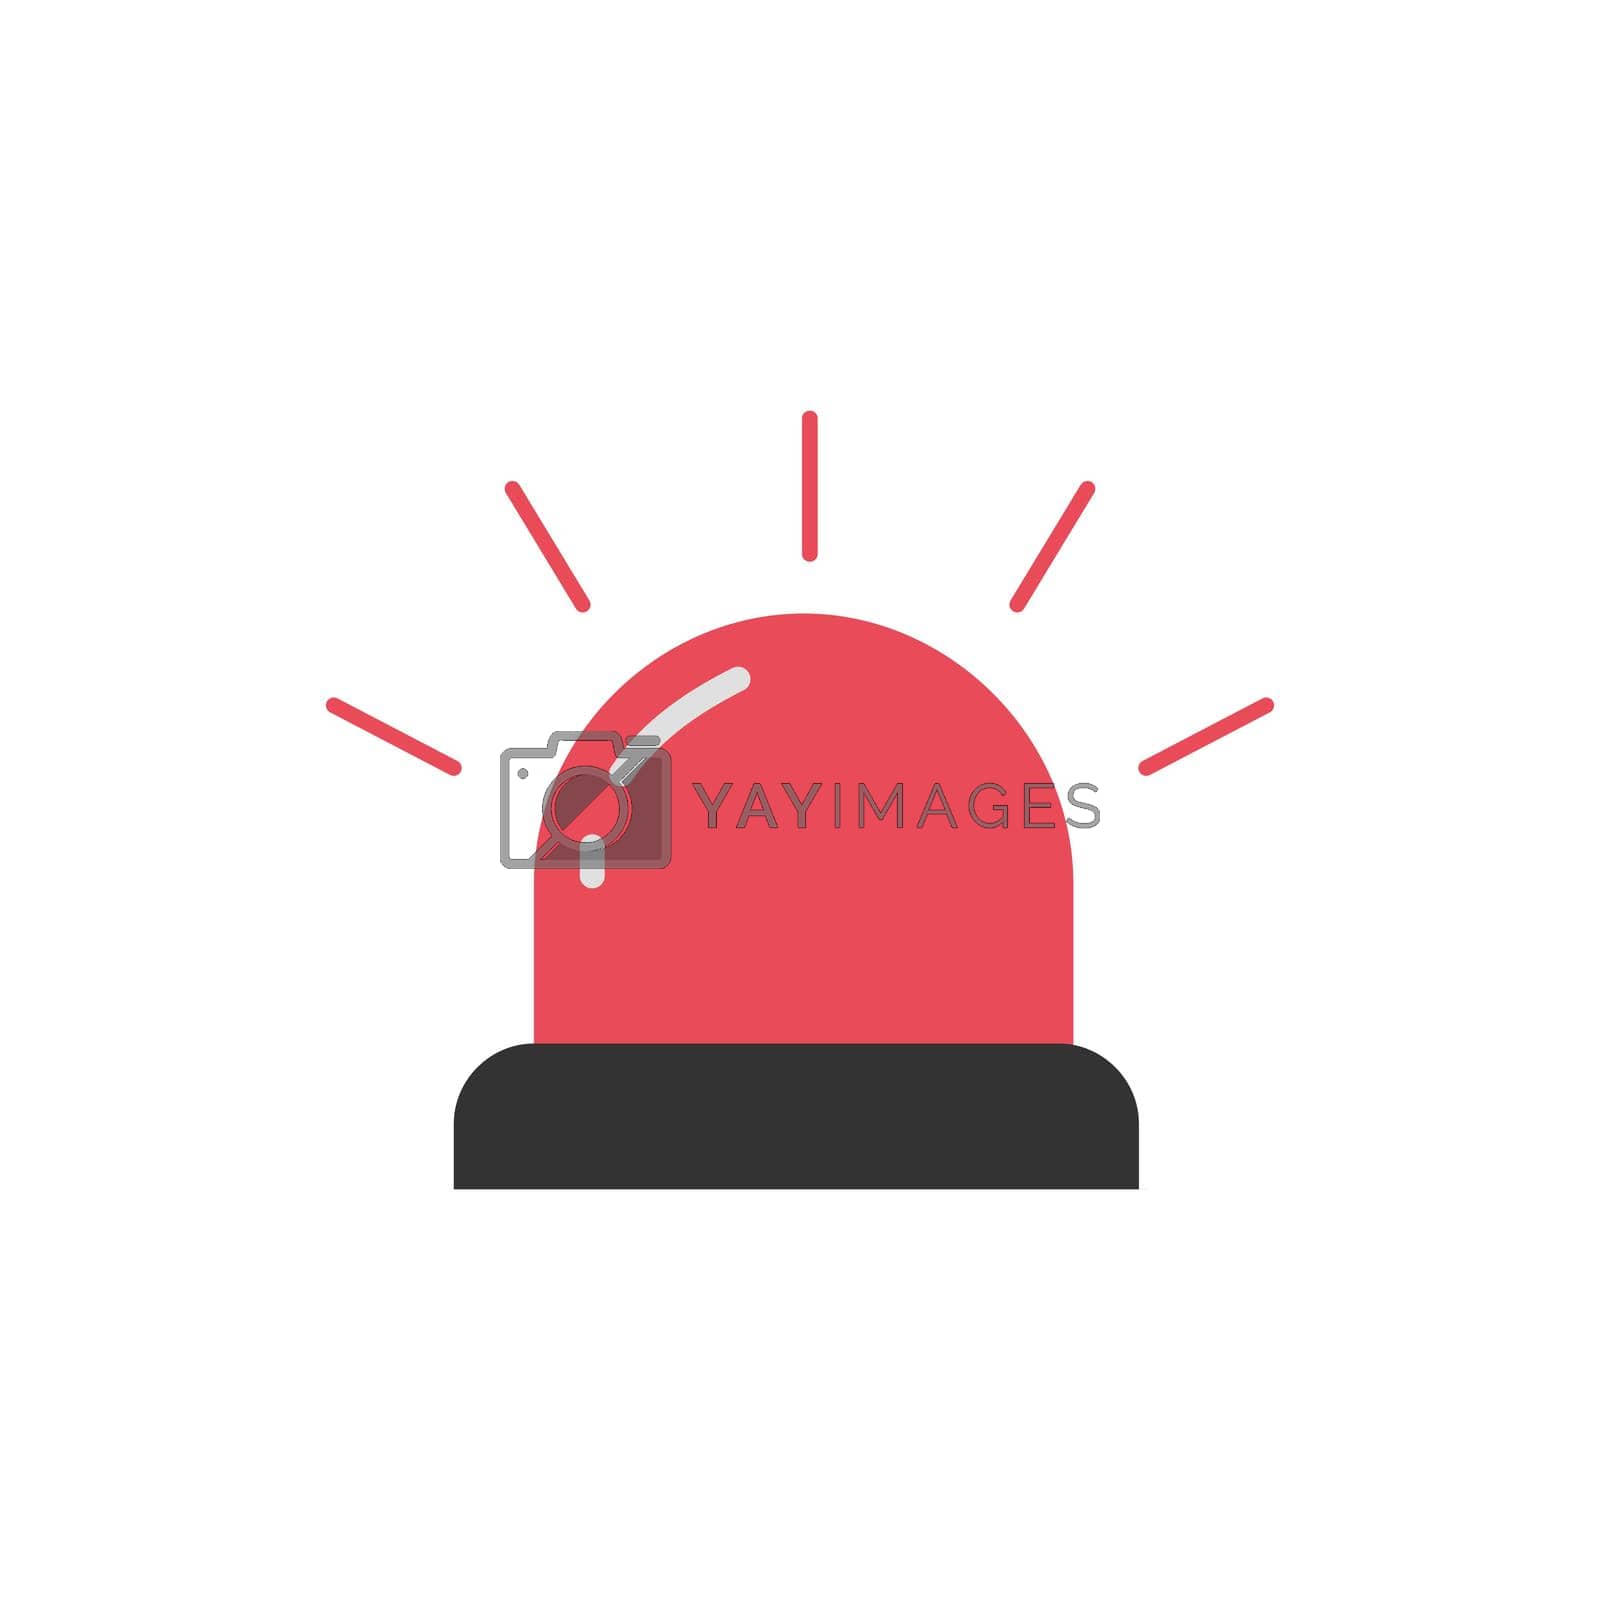 Royalty free image of Siren Red Flashing Emergency Light, police single light. Stock vector illustration isolated on white background by Kyrylov